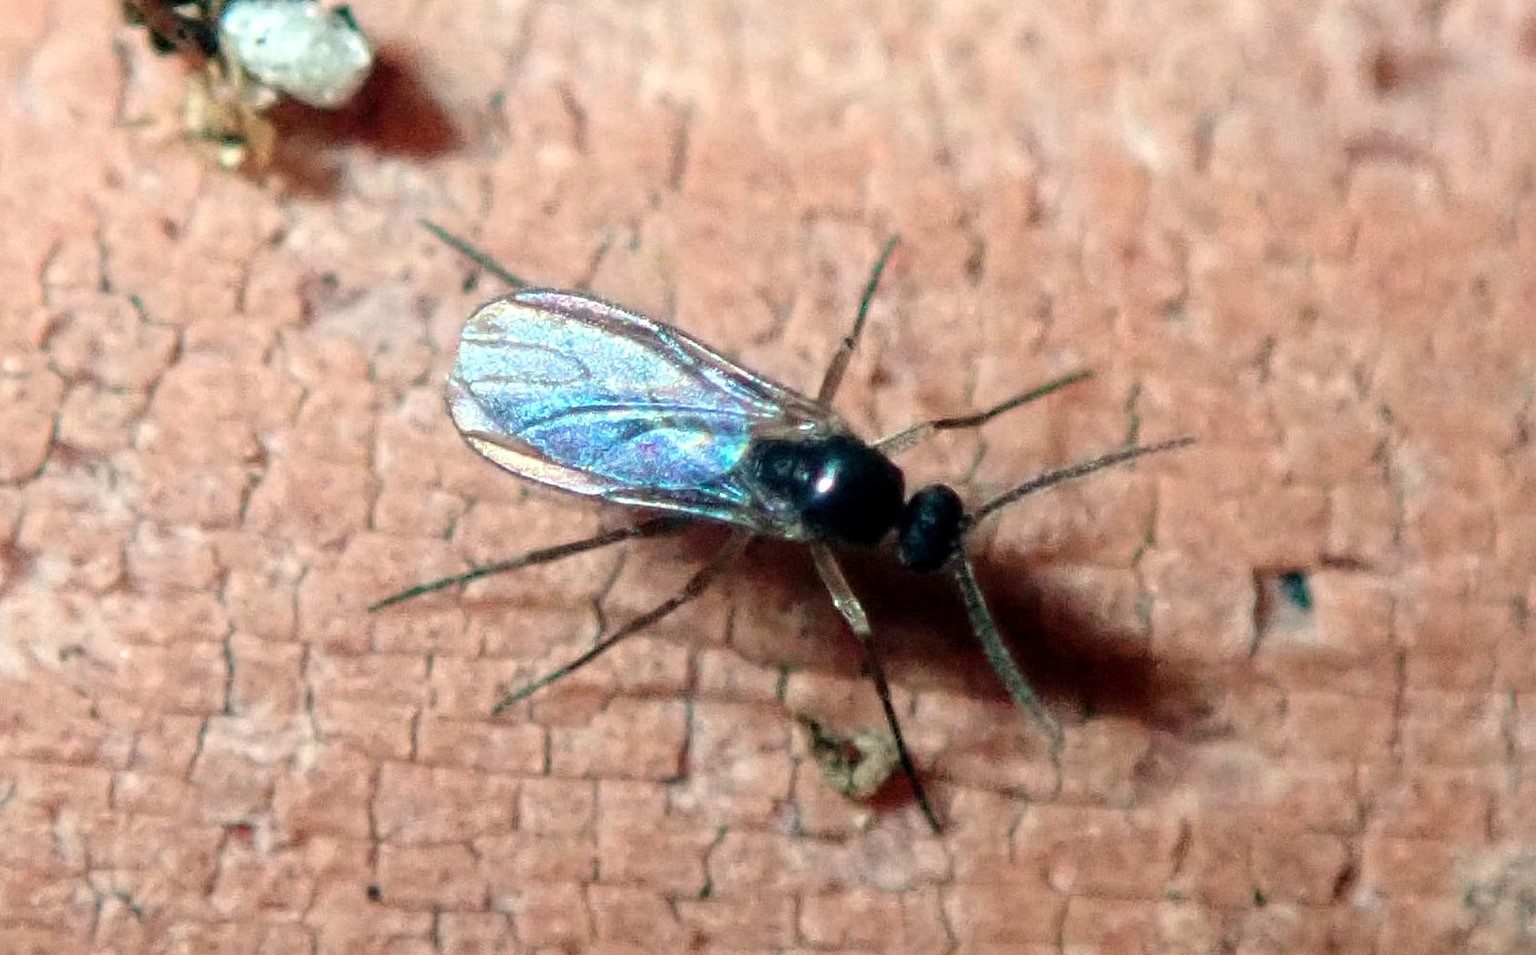 Managing fungus gnats need not be a toxic battle if you understand their life cycle and their environmental preferences. (Photo by: Whitney Cranshaw, Colorado State University, Bugwood.org)